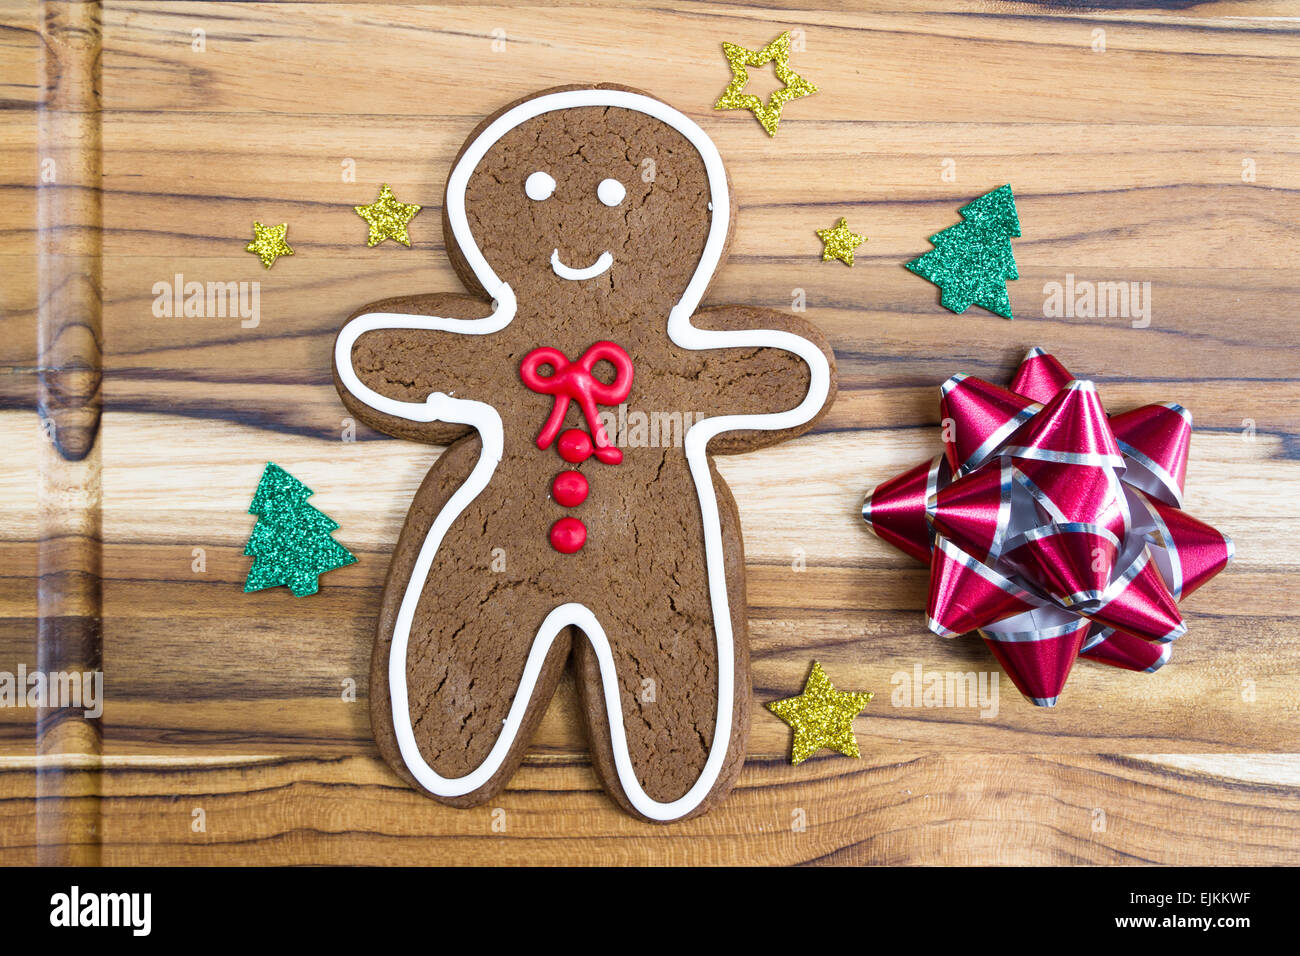 holiday classic, a gingerbread man cookie on a wooden table Stock Photo